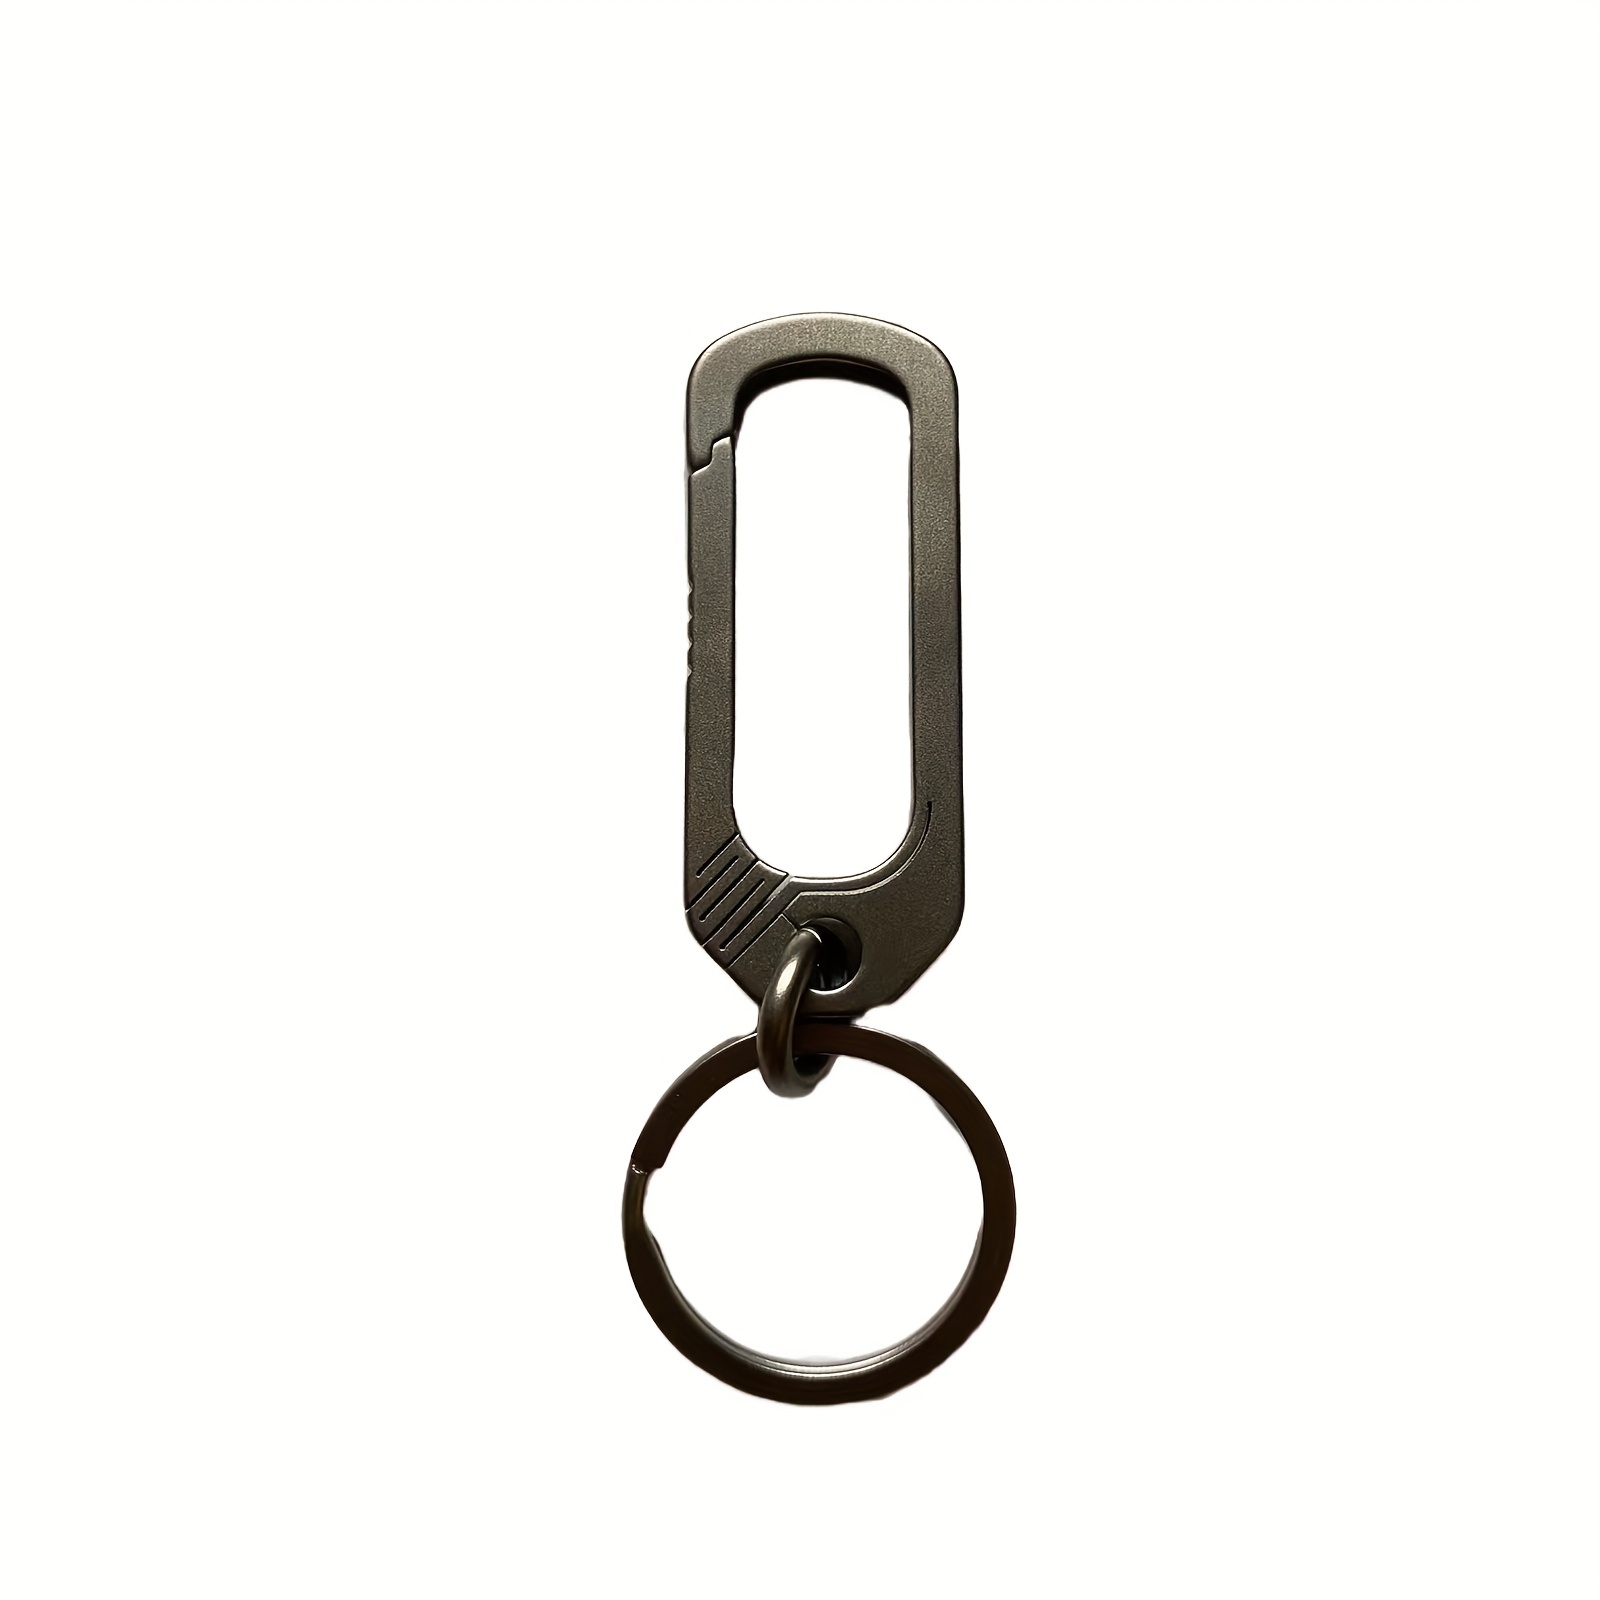 TISUR Titanium Round Carabiner Clip,Spring Hook Key Ring,Small Keychain  Carabiner,with D-Ring for Keys Black Carabiner Key Clip